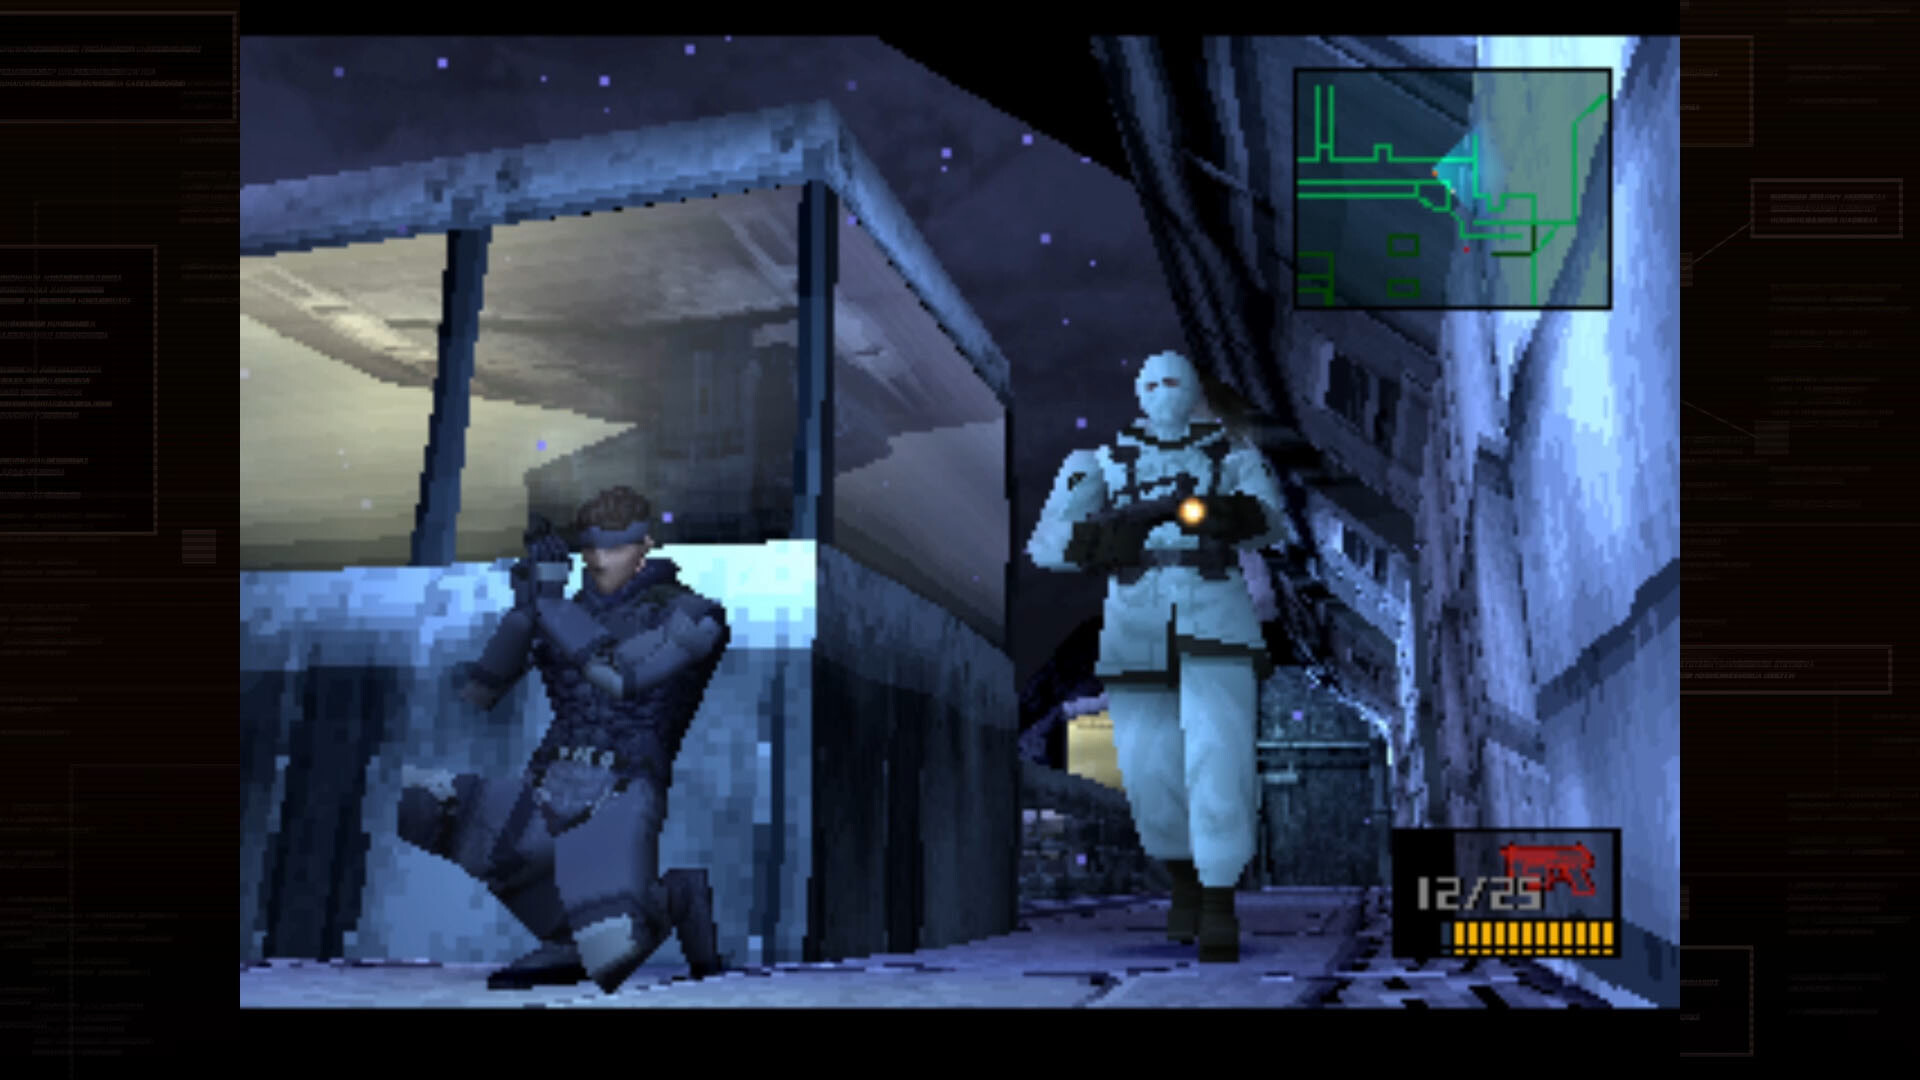 solid snake from the first game hiding near a wall while an enemy is walking towards him